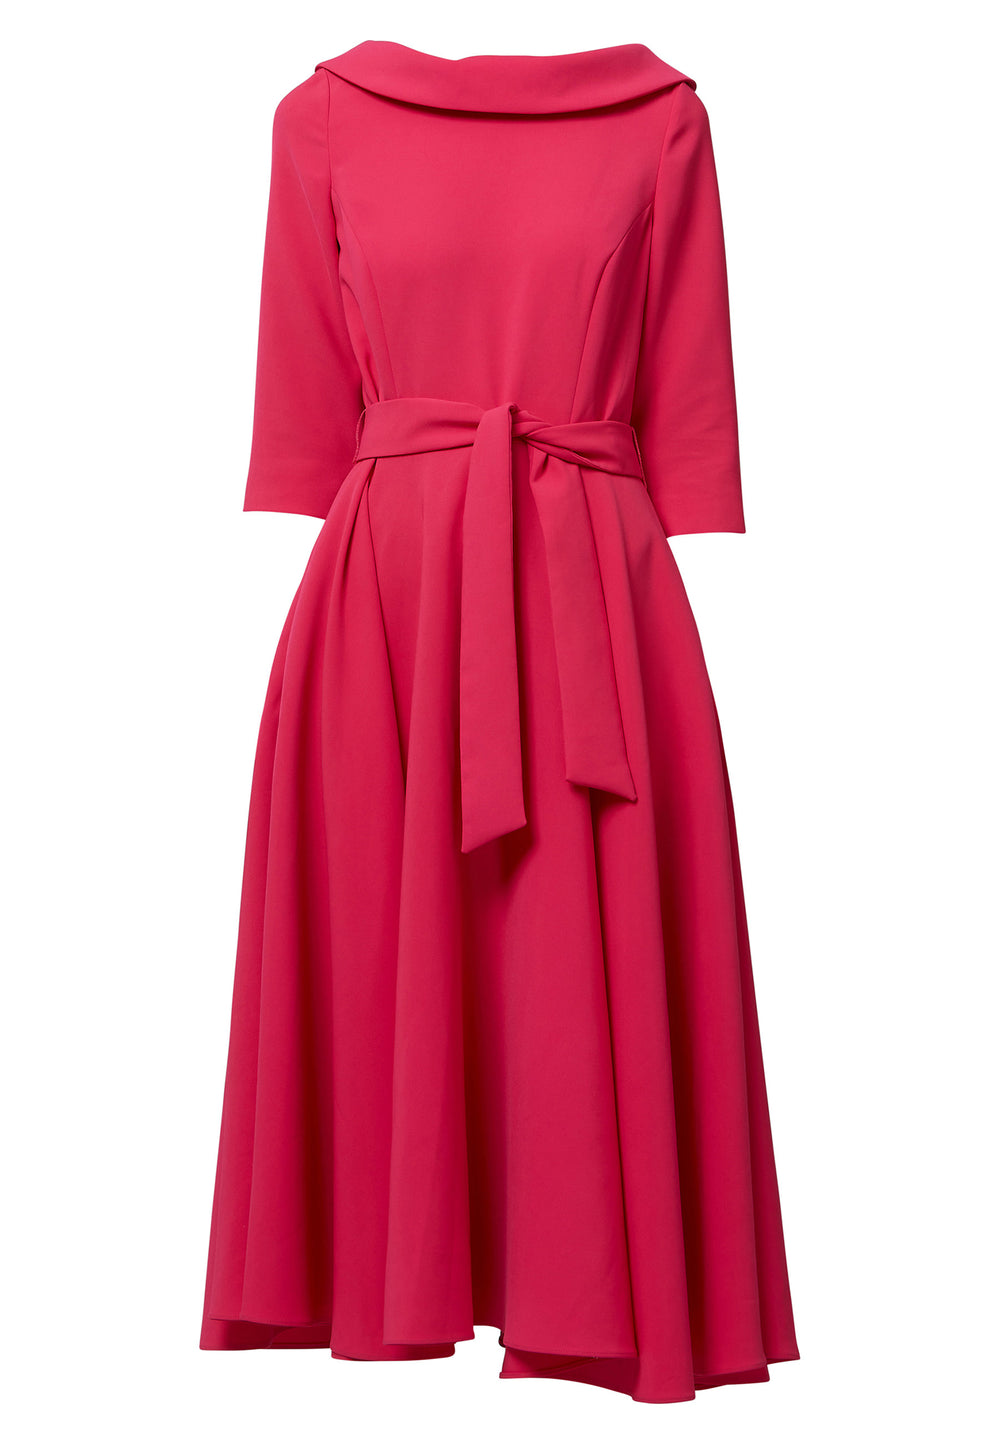 Marilyn is a captivating choice for your upcoming occasions. A striking Hot pink dress with a cowl collar. The silhouette is rooted in simplicity with a fitted bodice and flared skirt. Features side seam pockets and a detachable belt. Attending a summer wedding? Mother of the bride? Heading to the races? This is the dress for you. Simply pair with heels to compliment this elegant design.